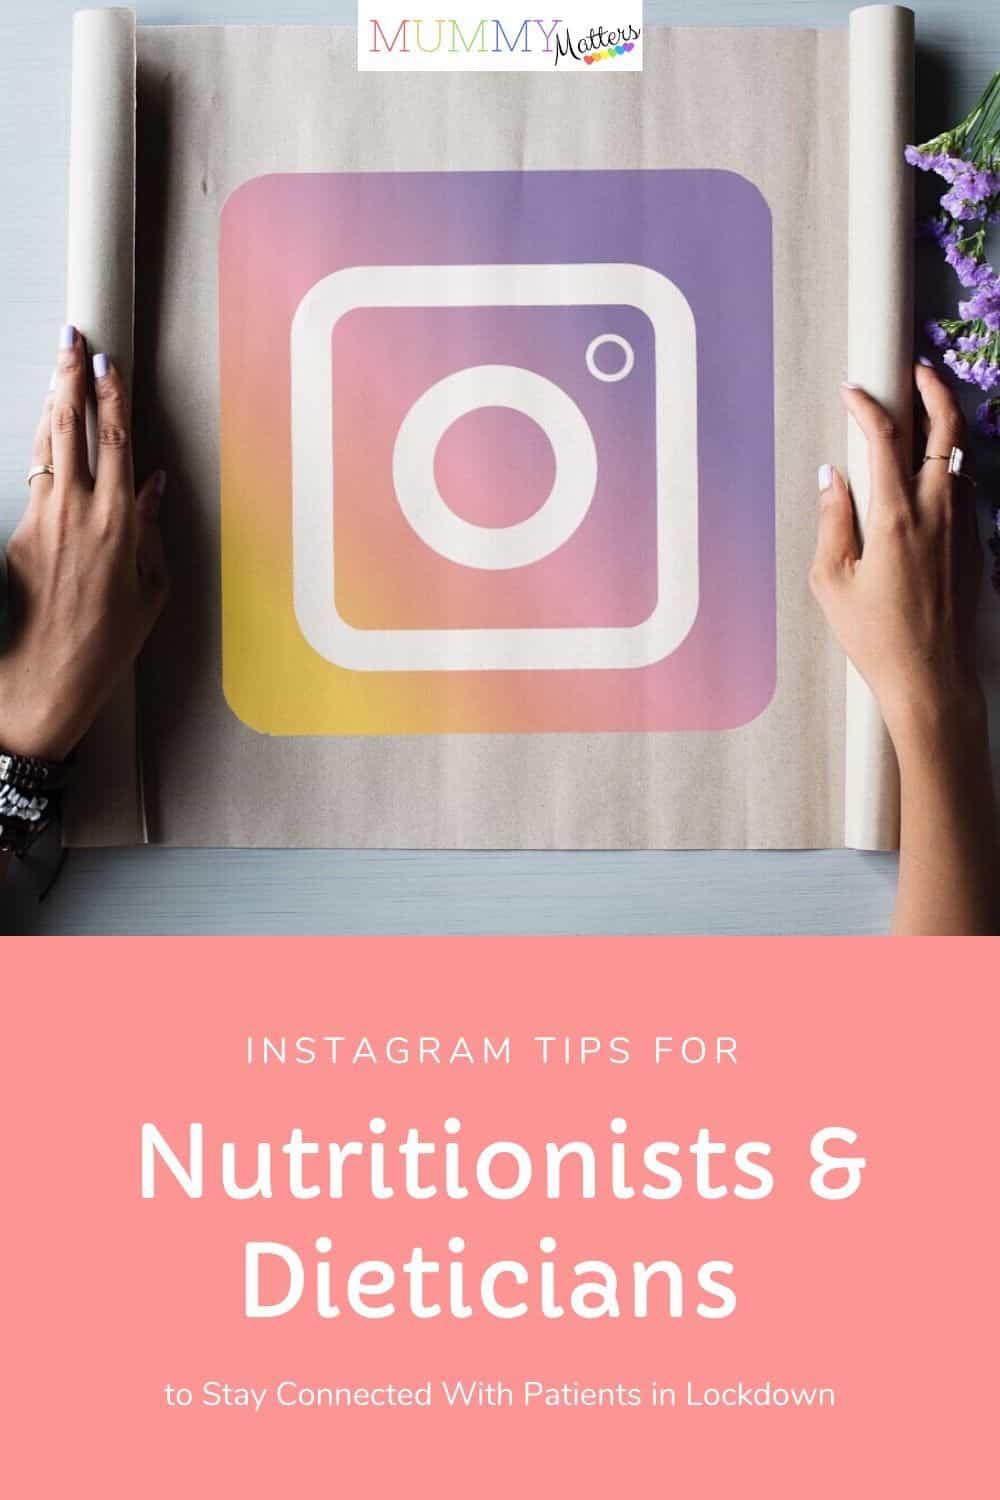 These Instagram tips will help Nutritionists and Dieticians to stay in touch with their clients during the Covid-19 Pandemic to keep their business running.